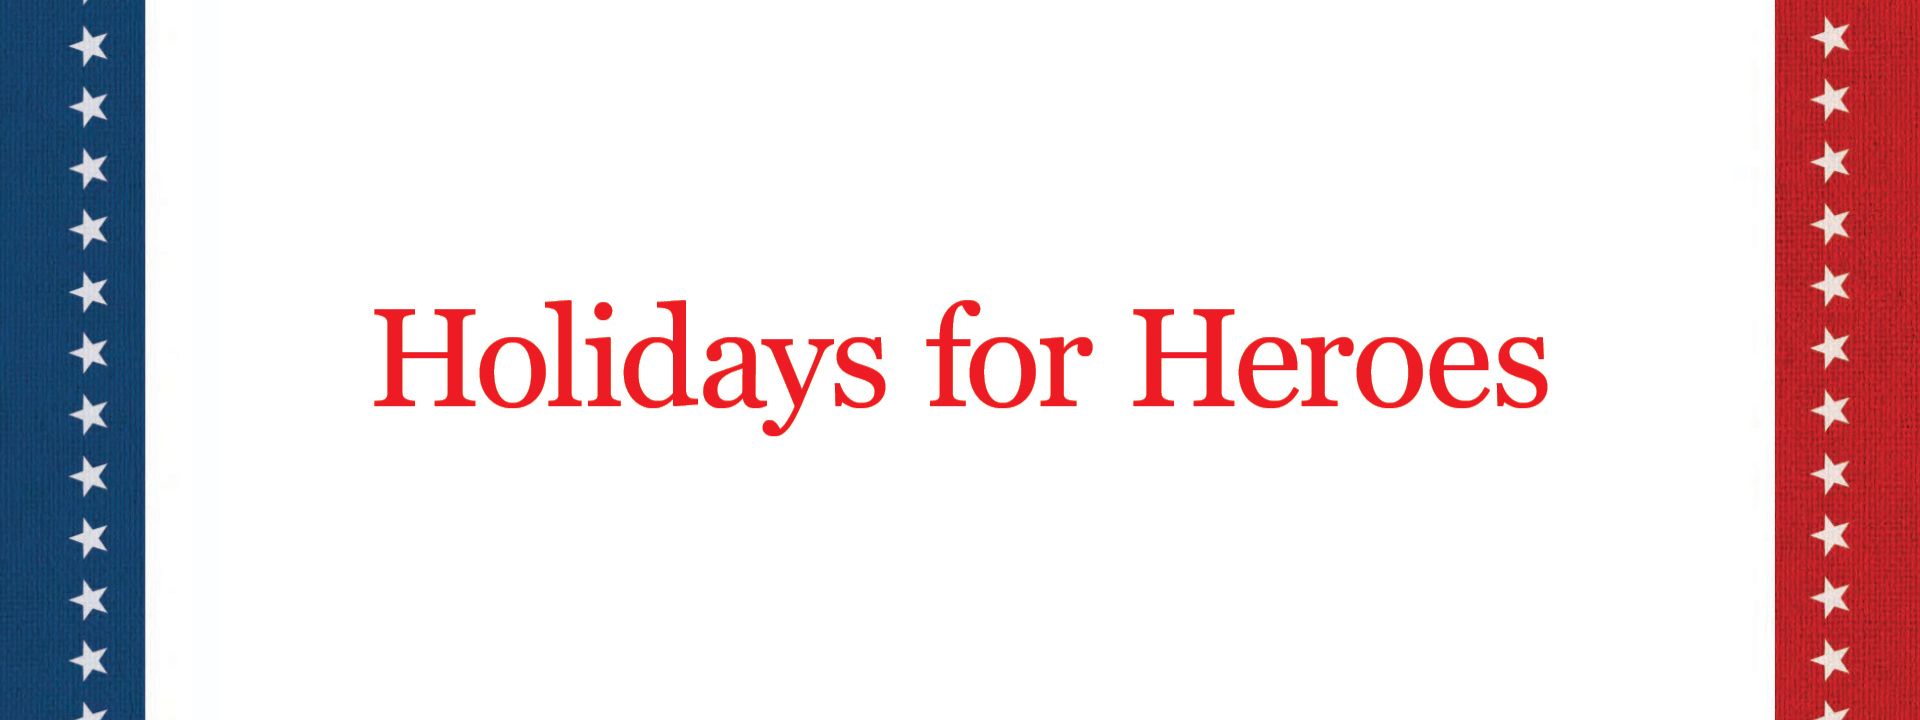 holiday for heroes graphic